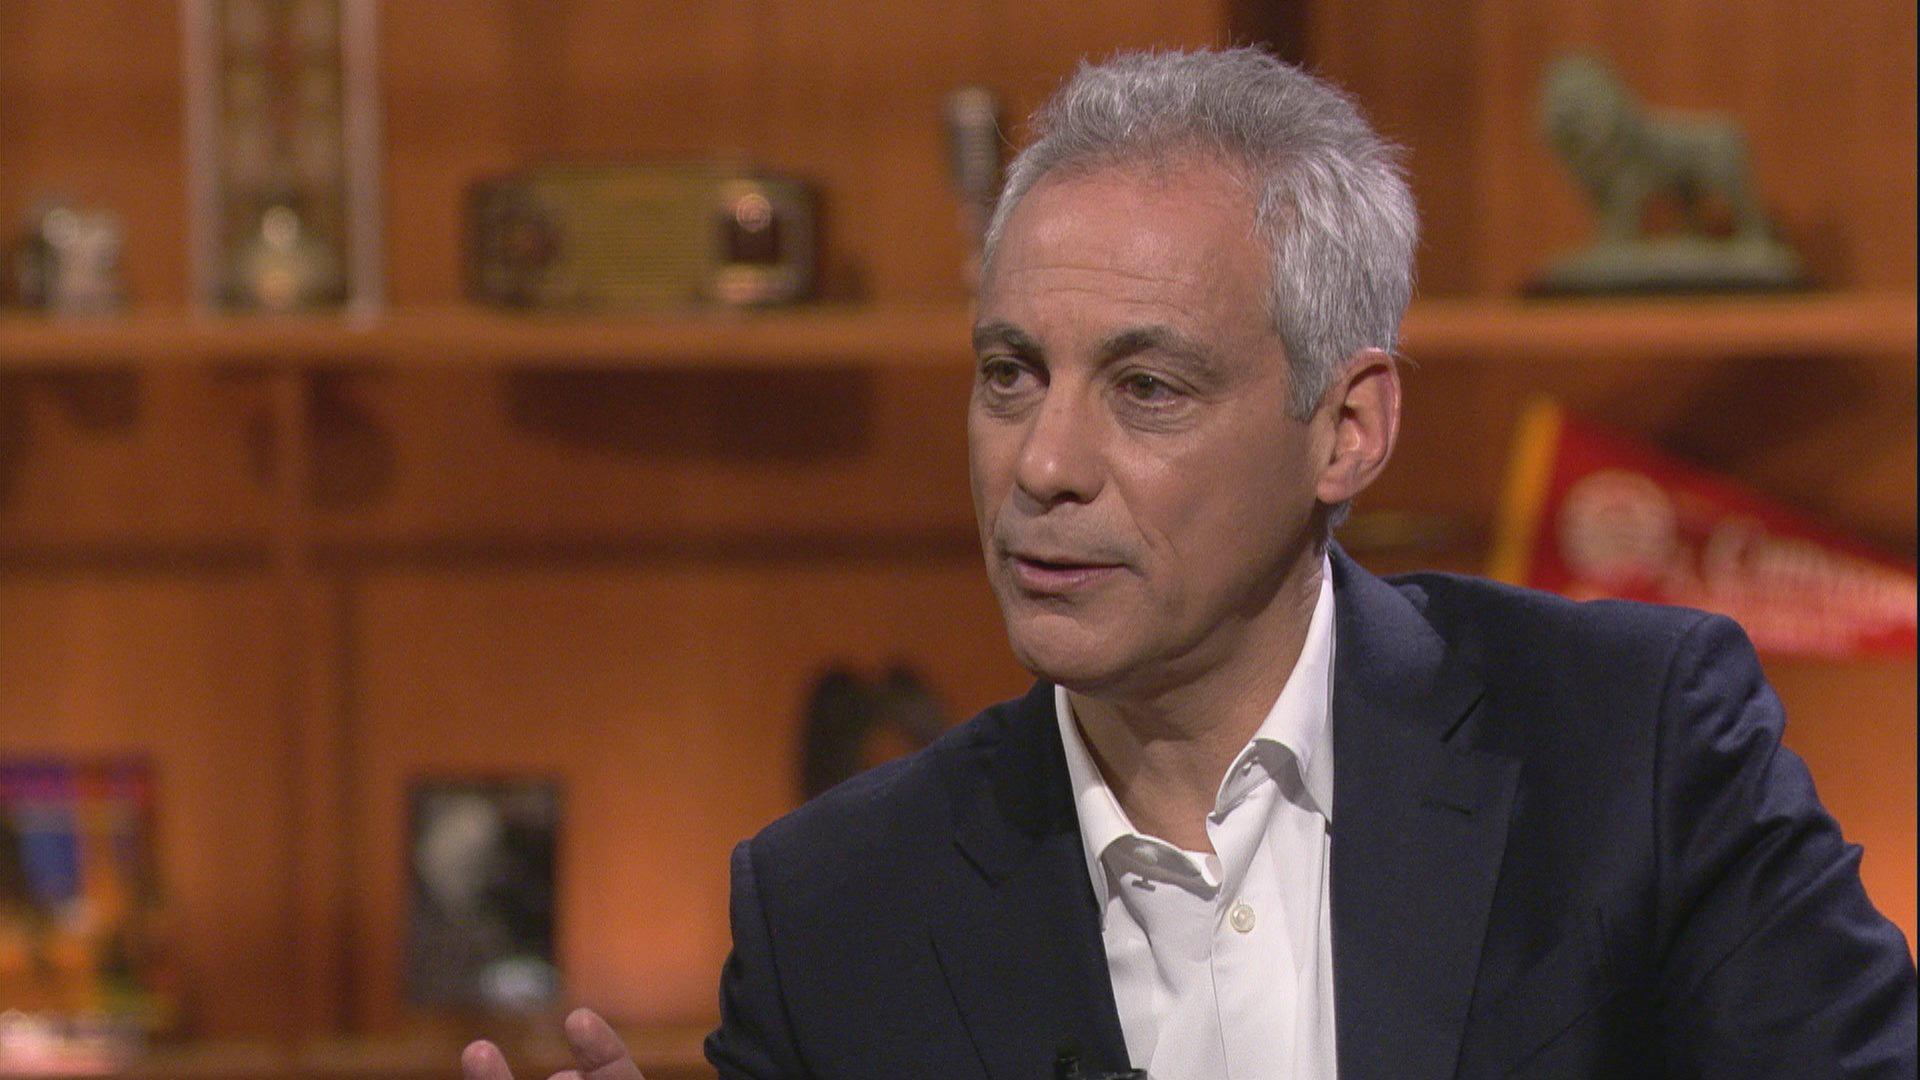 Former Mayor Rahm Emanuel appears on “Chicago Tonight” on May 13, 2019. (WTTW News)